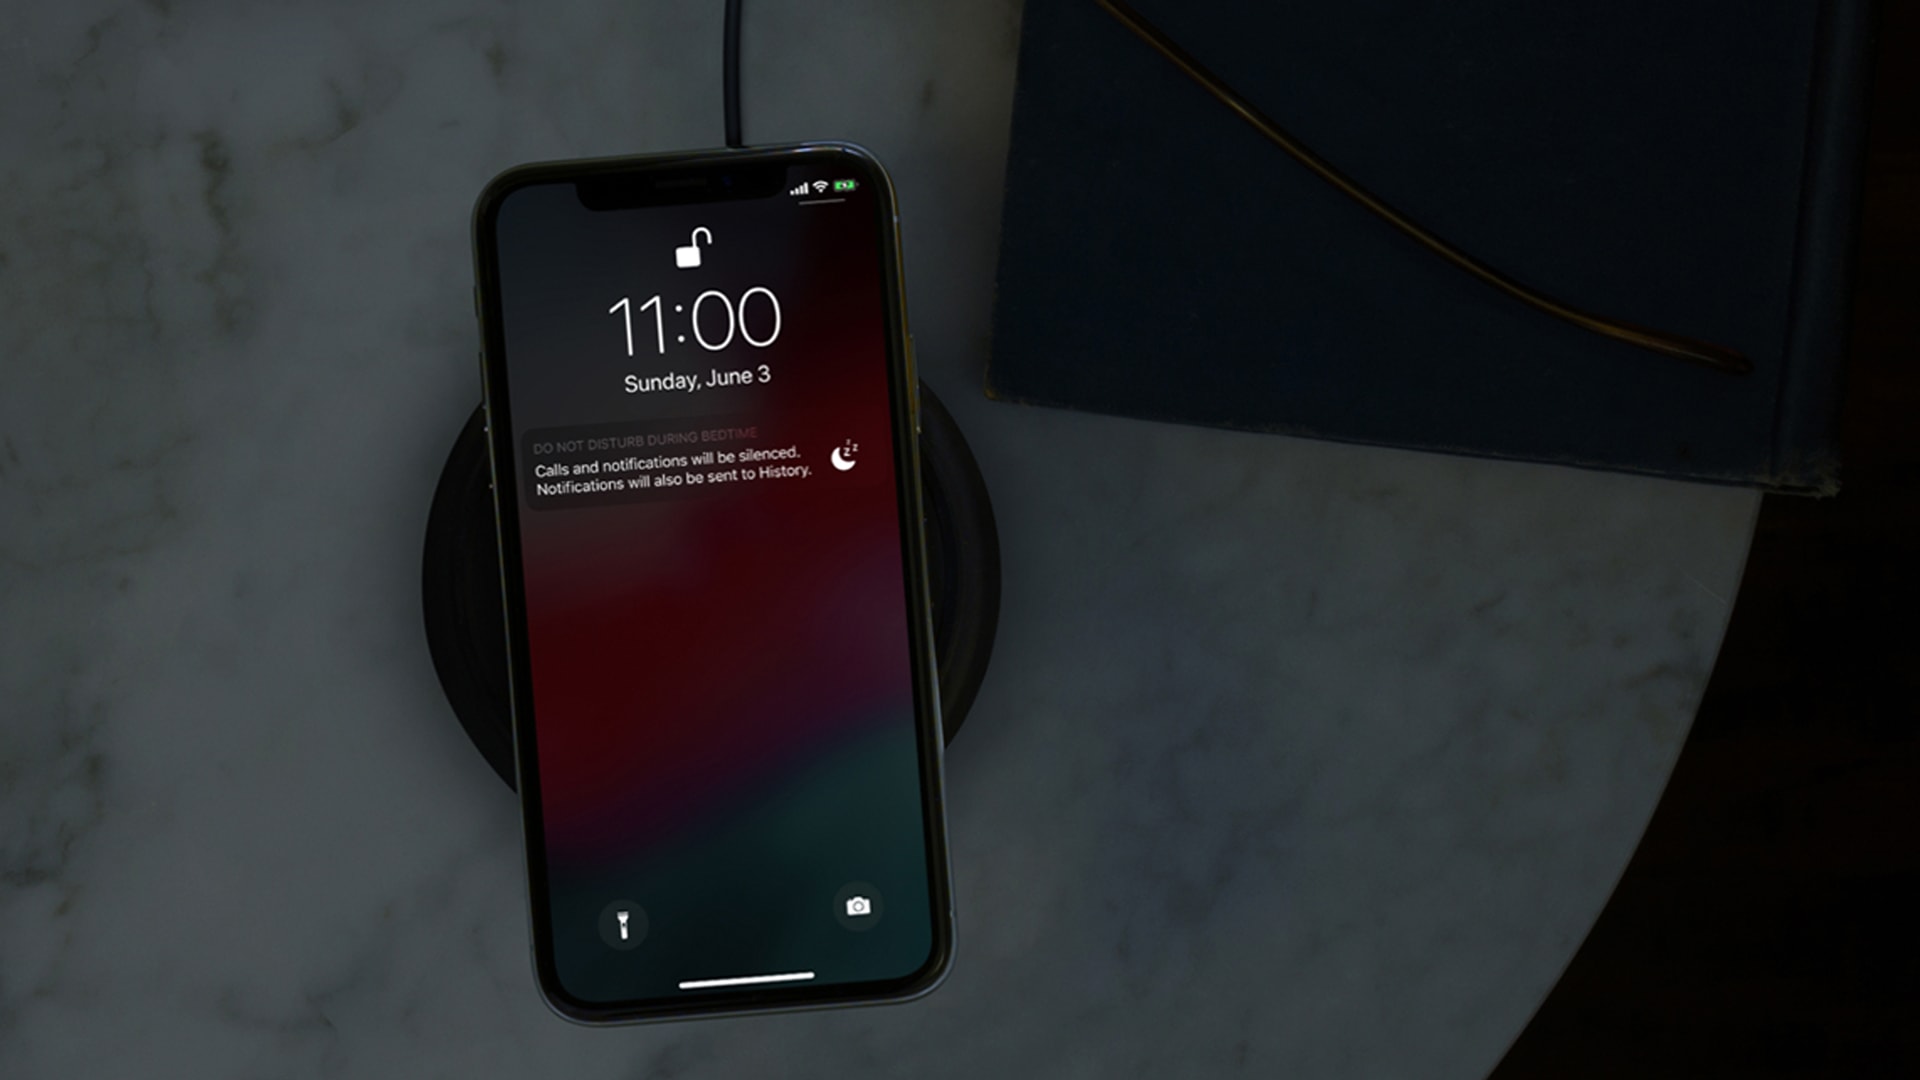 The iPhone’s new responsible-use features are a very 2018 move